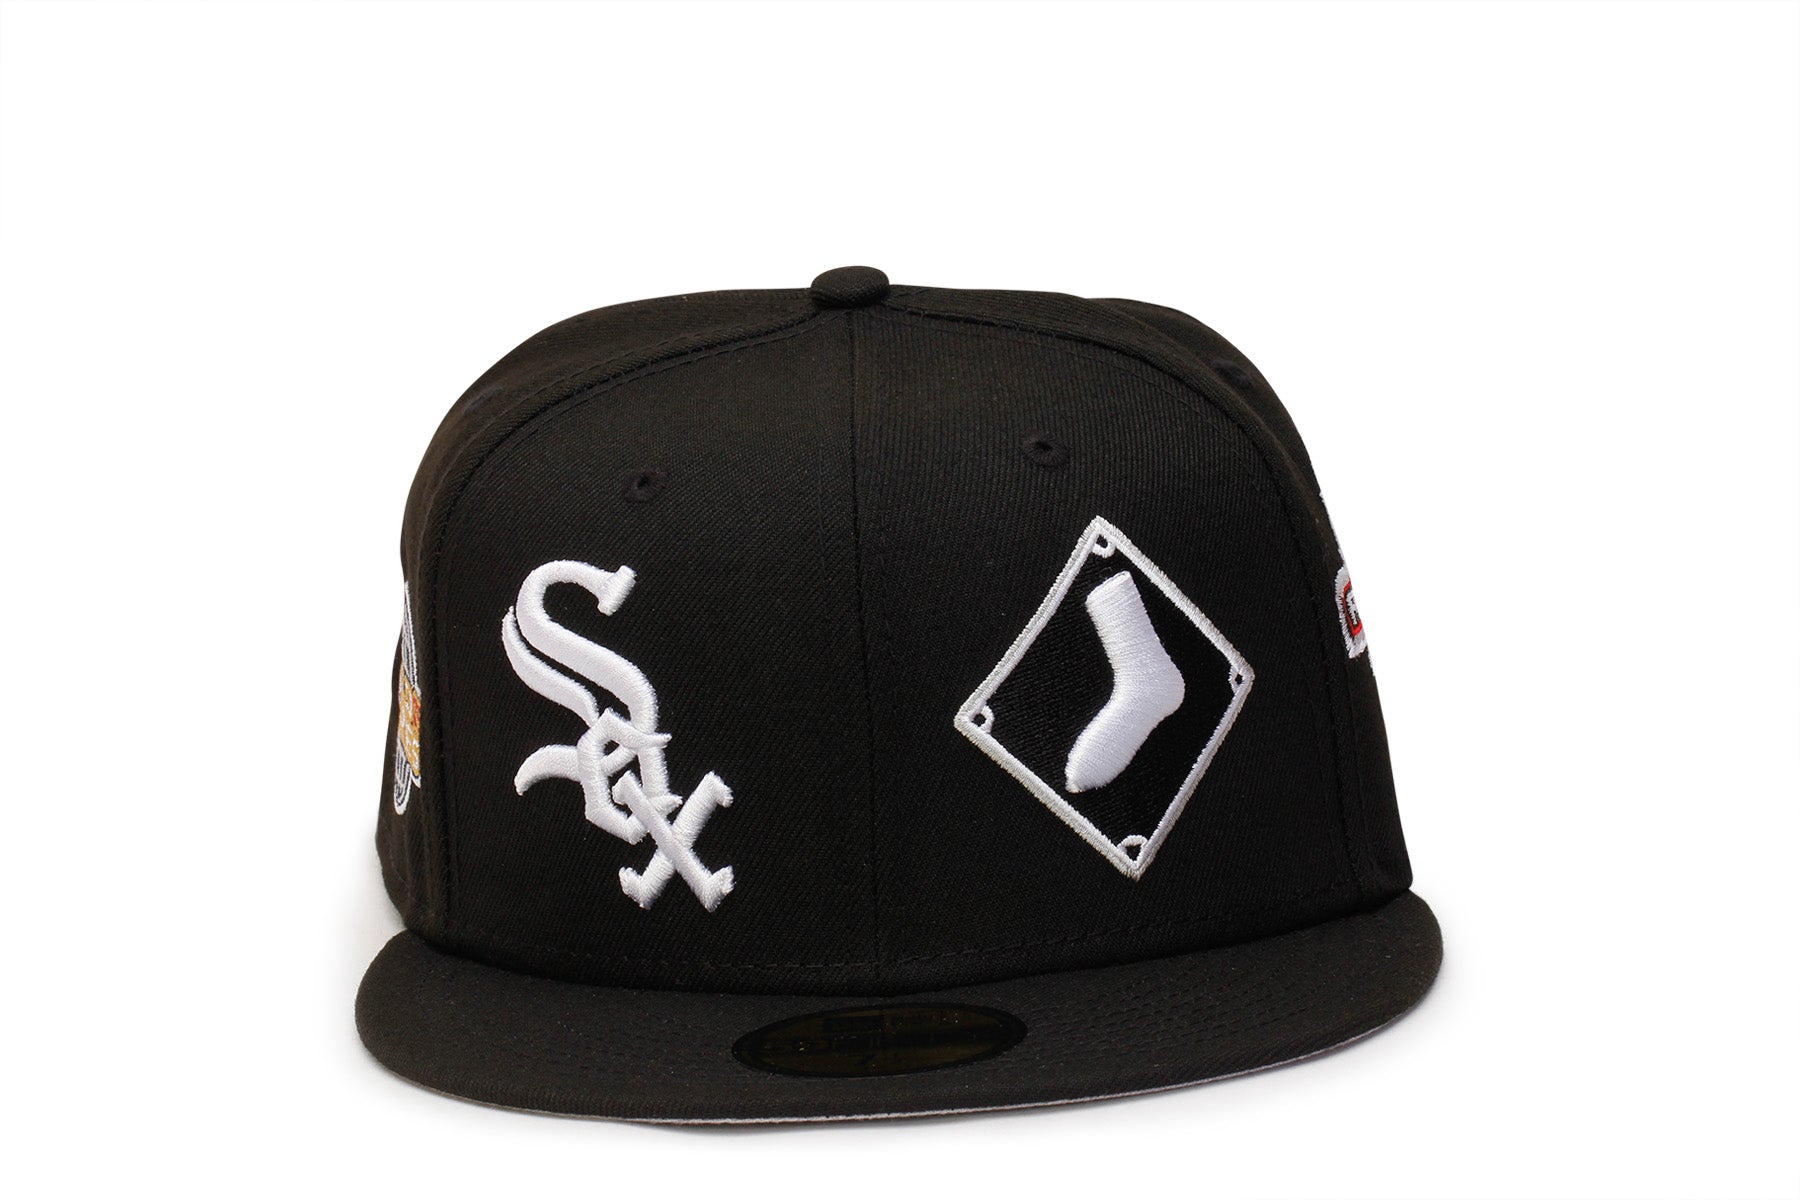 sox hat with patch